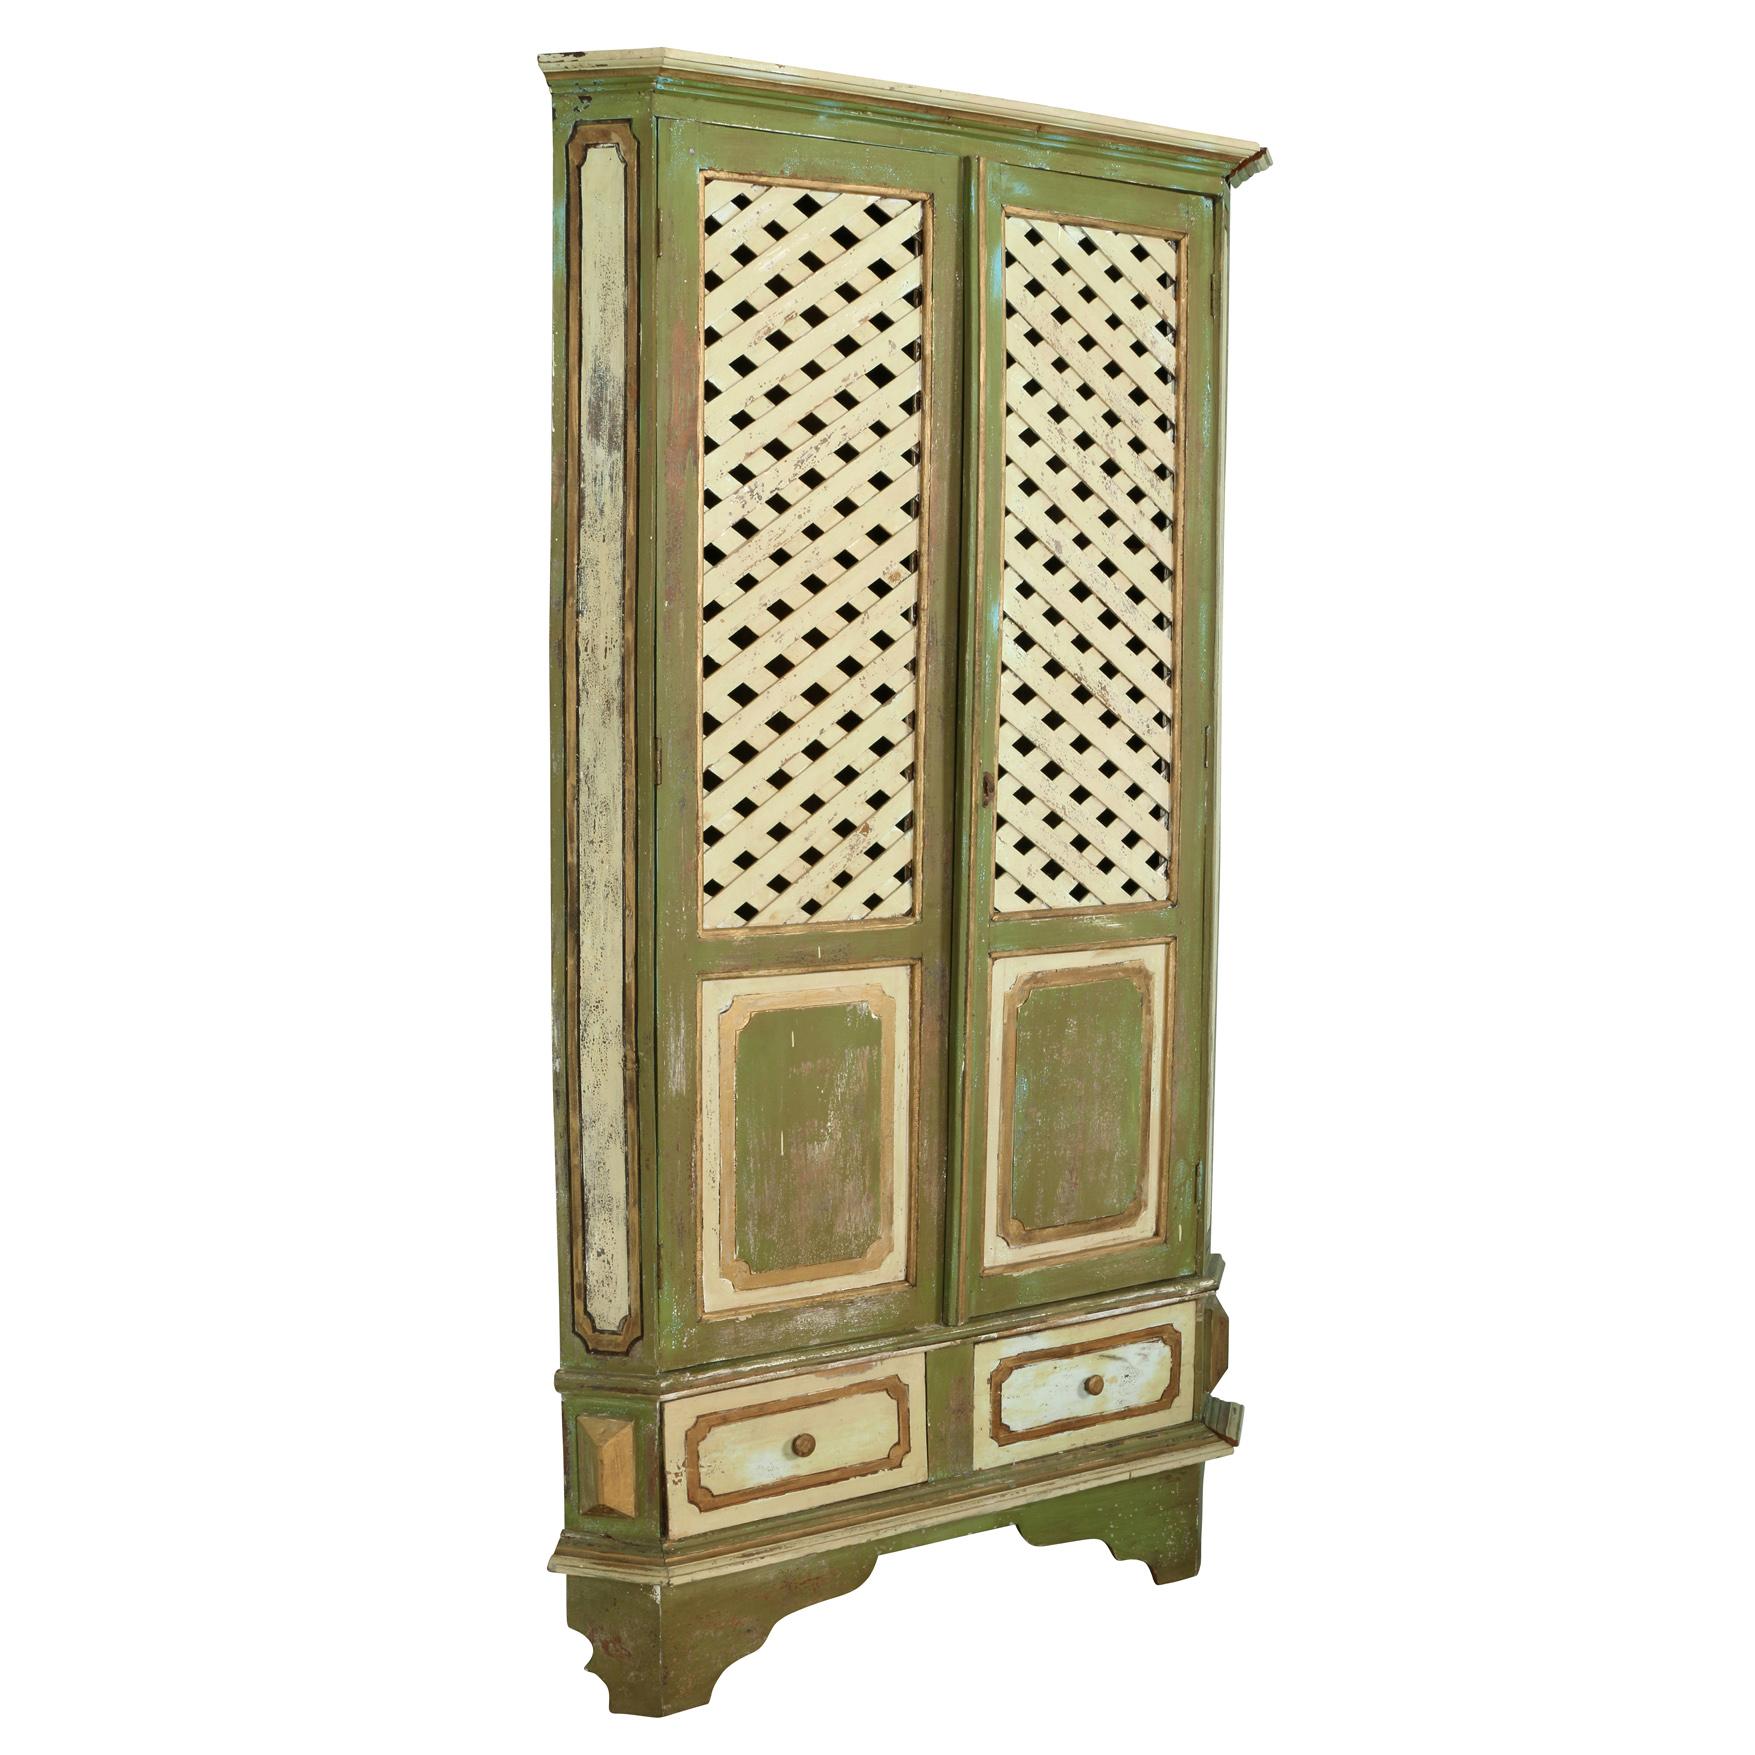 European trelliage green and antique white painted corner wood cabinet. Two doors open to reveal storage shelves. Two drawers at bottom.